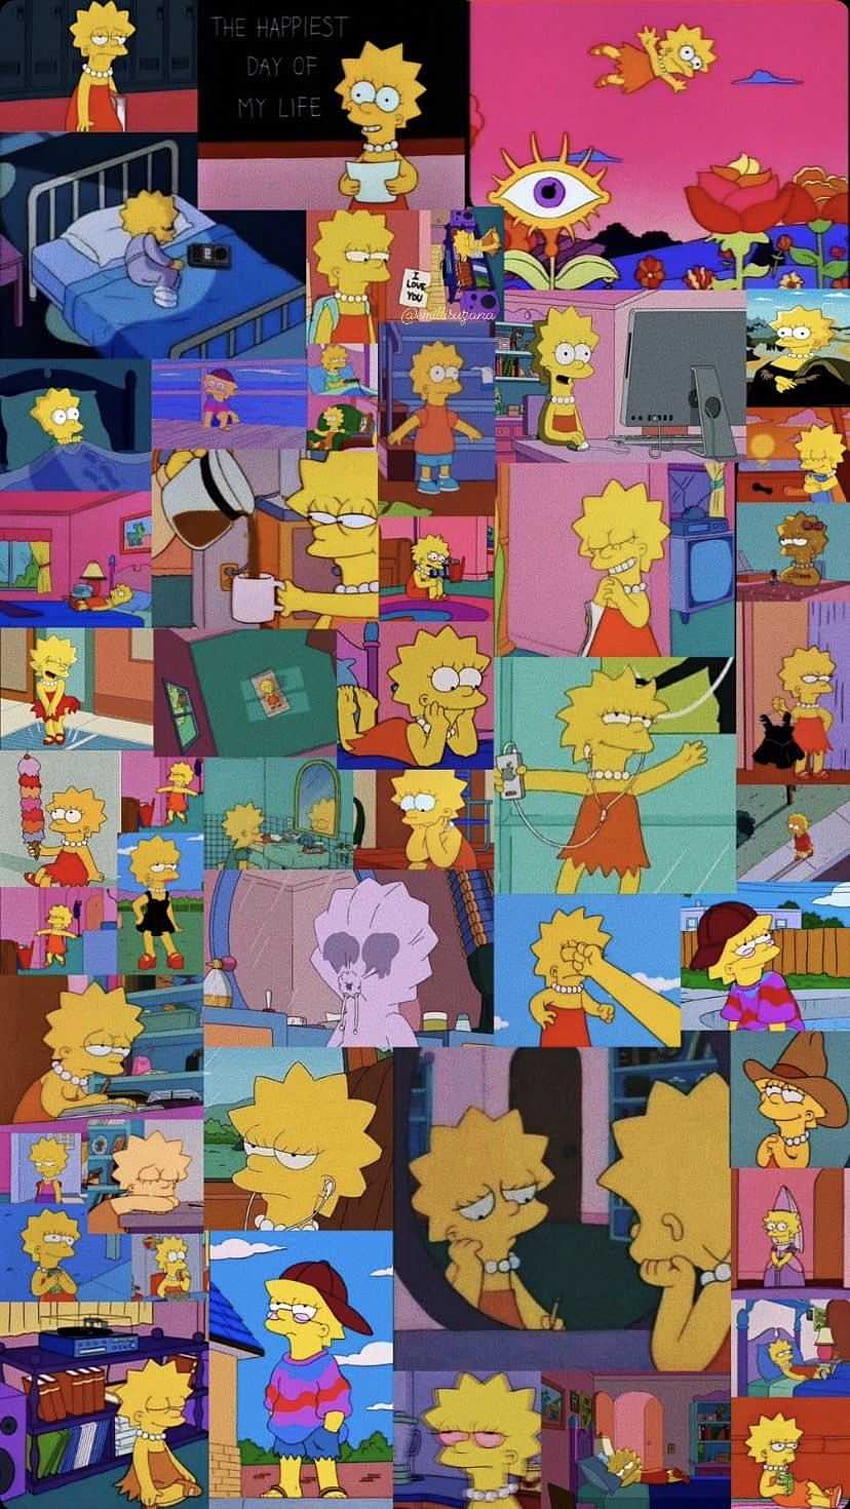 Family Homer Simpson The Simpsons Bart Simpson Lisa Simpson Marge Simpson  Maggie Simpson wallpaper  1920x1080  301548  WallpaperUP